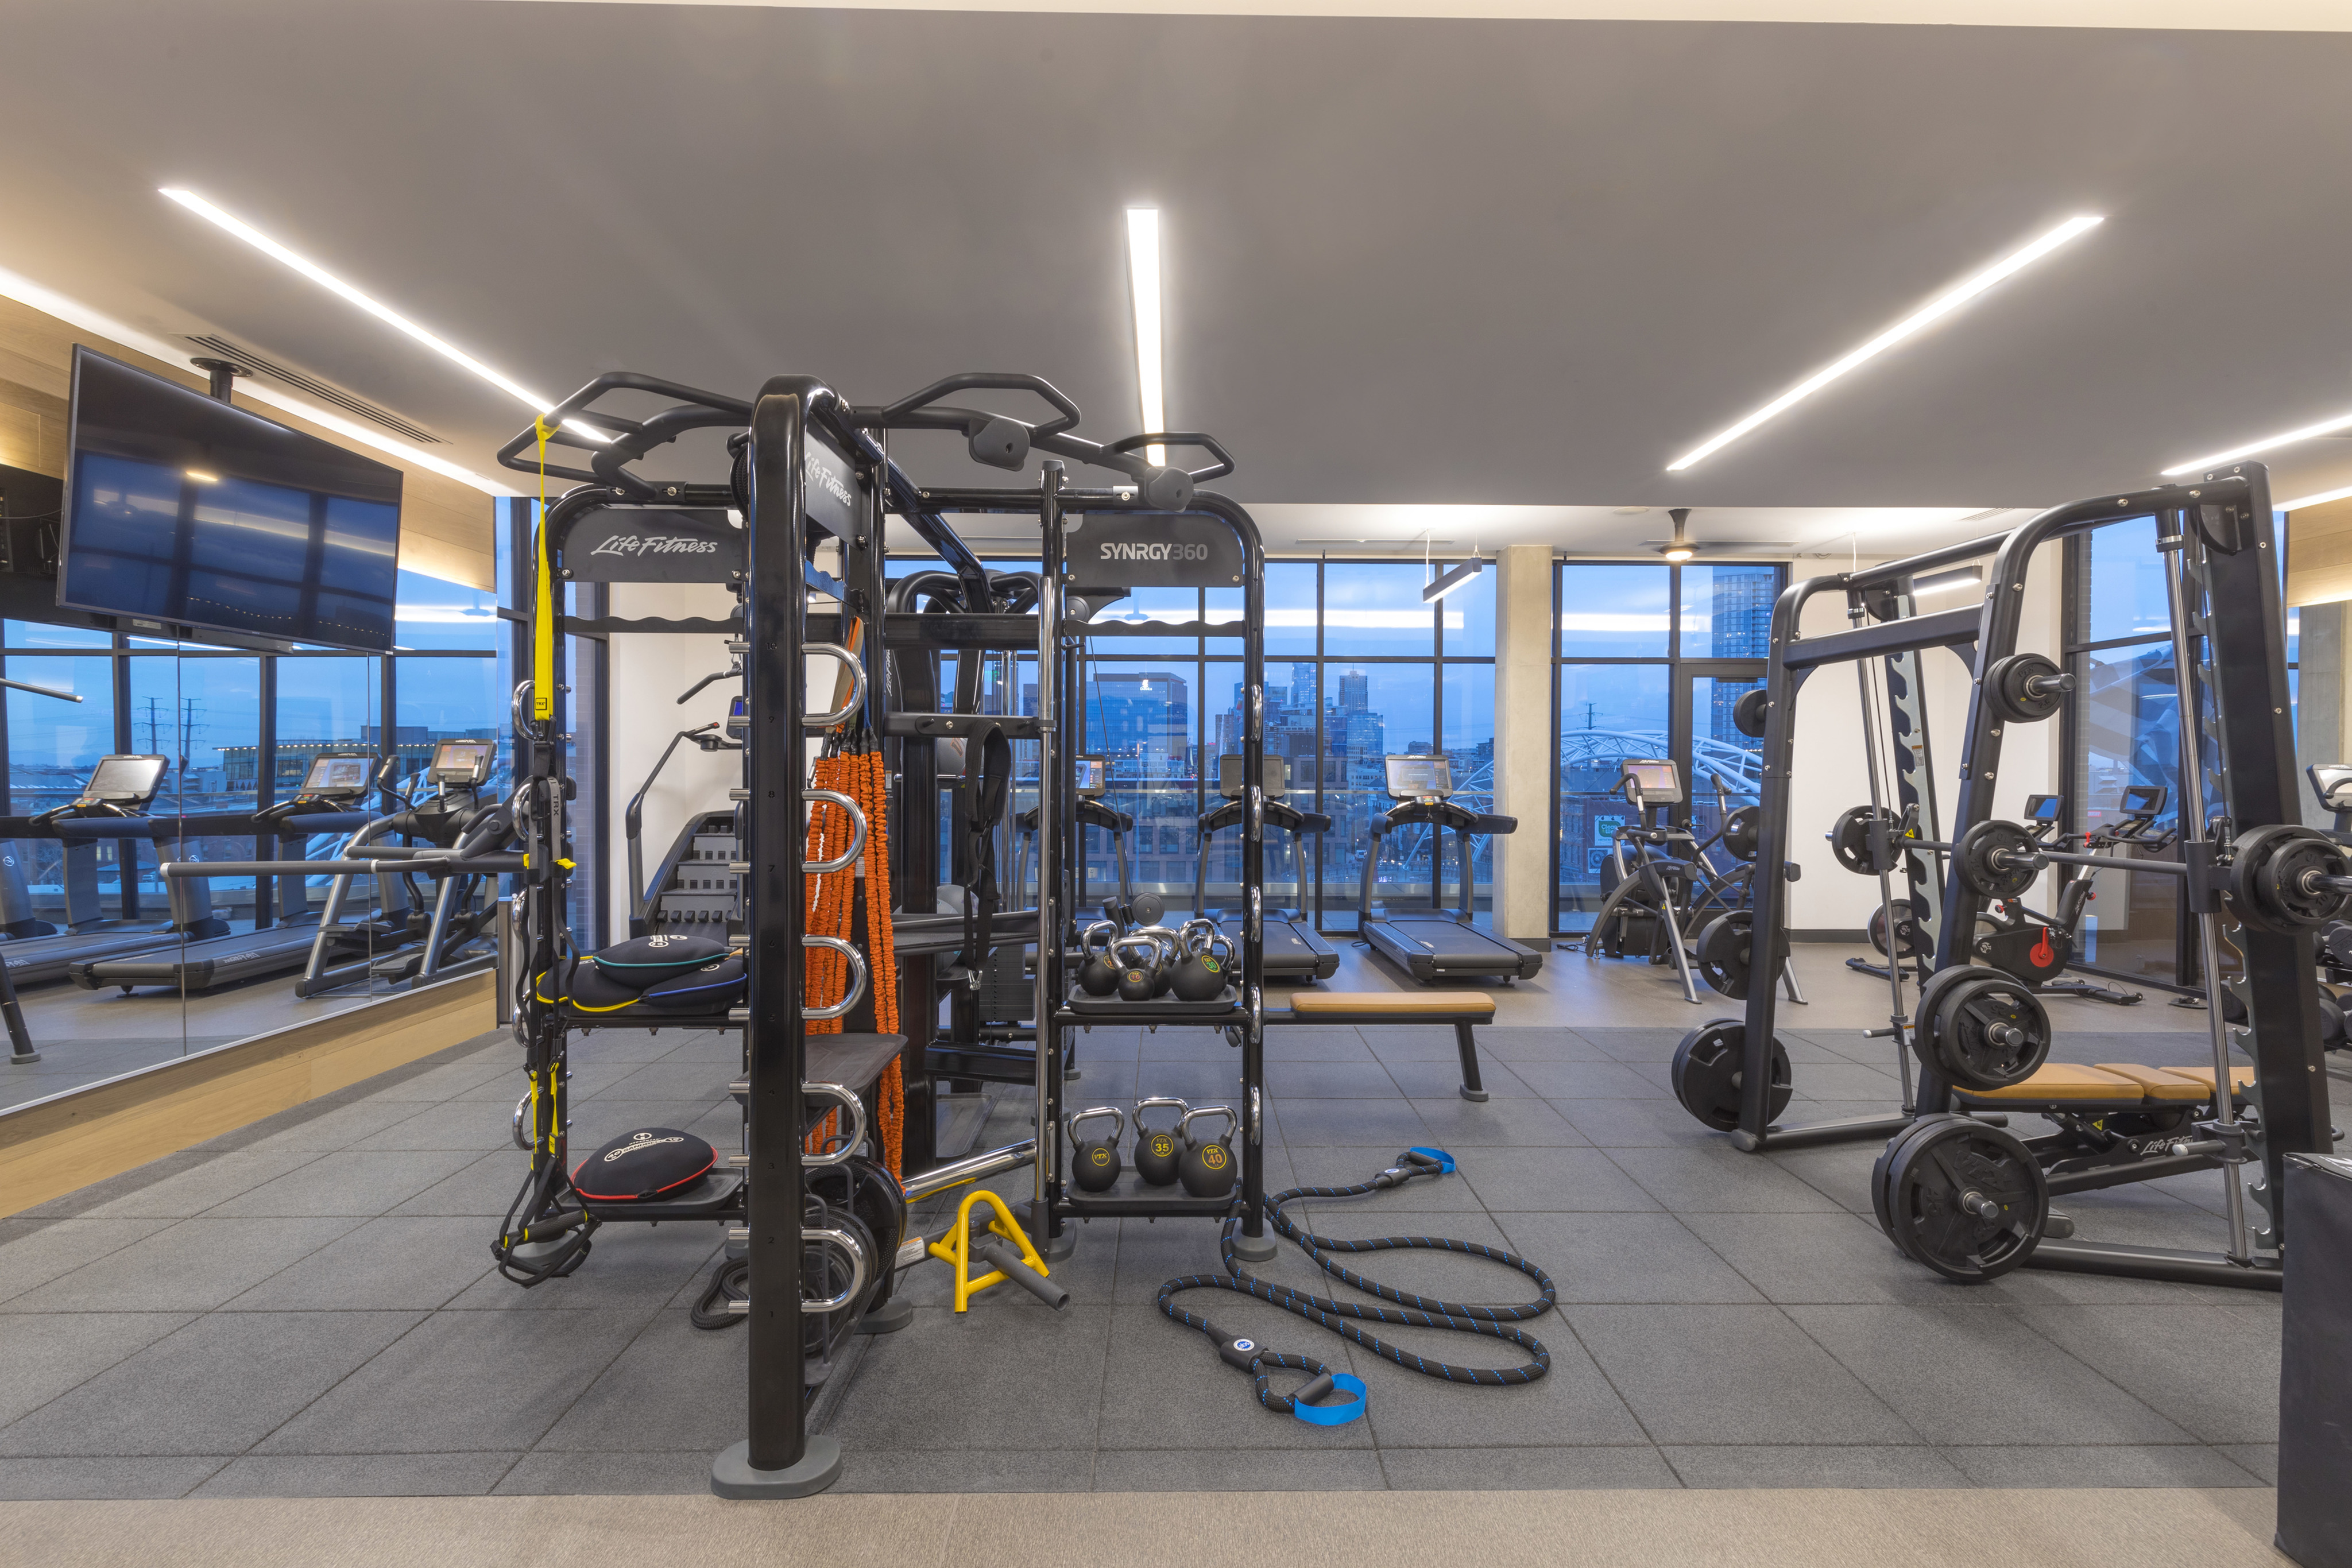 HIIT inspired fitness center featuring TRX equipment, weight machines, and city views